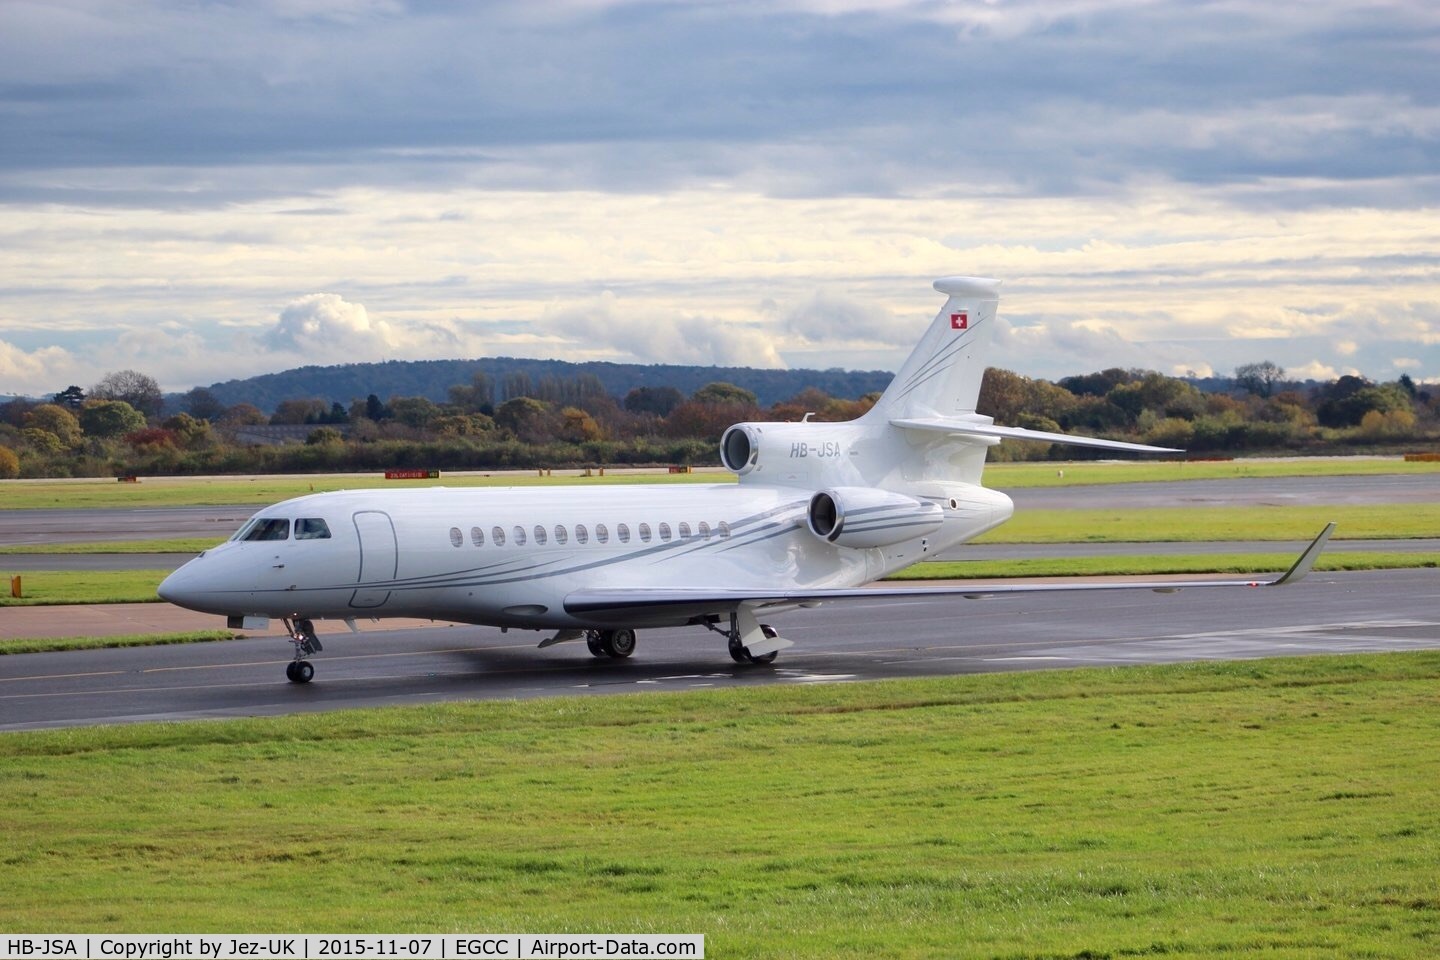 HB-JSA, 2012 Dassault Falcon 7X C/N 161, taxi-in from runway 23r, to Landmark Aviation